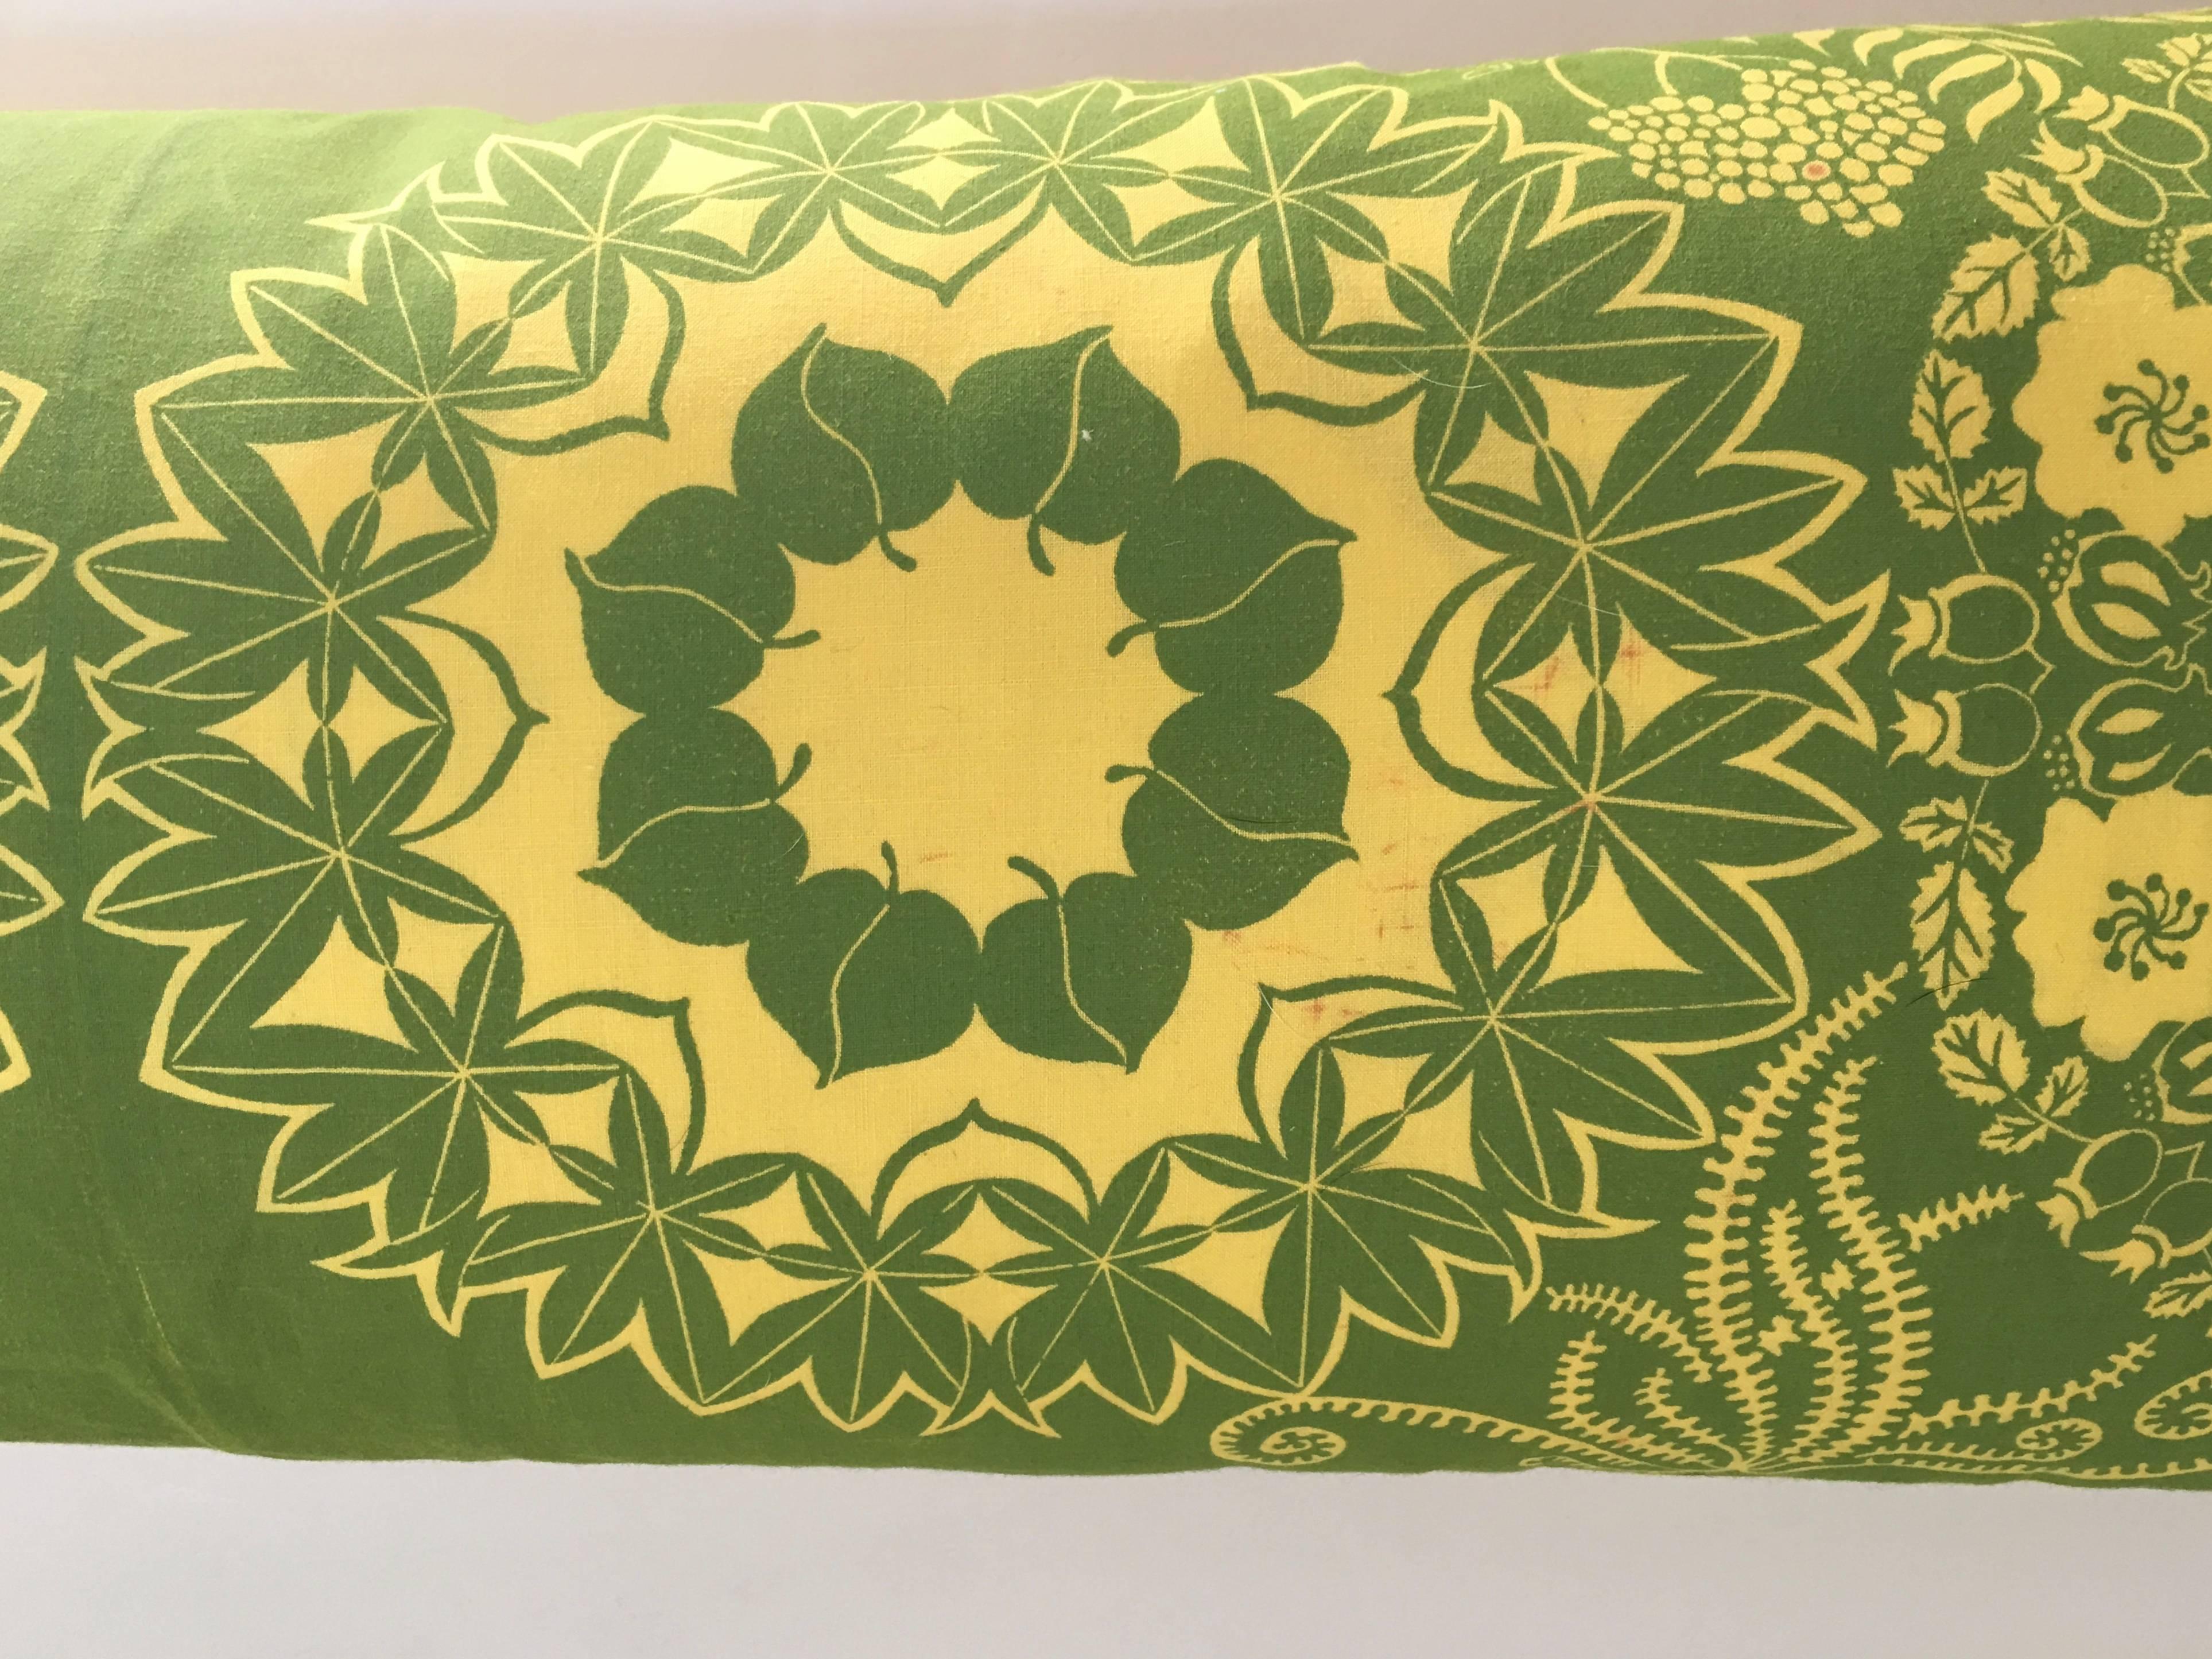 Hand-Crafted Summer Wreaths Yellow and Green Folly Cove Designers Hand Printed Pillow